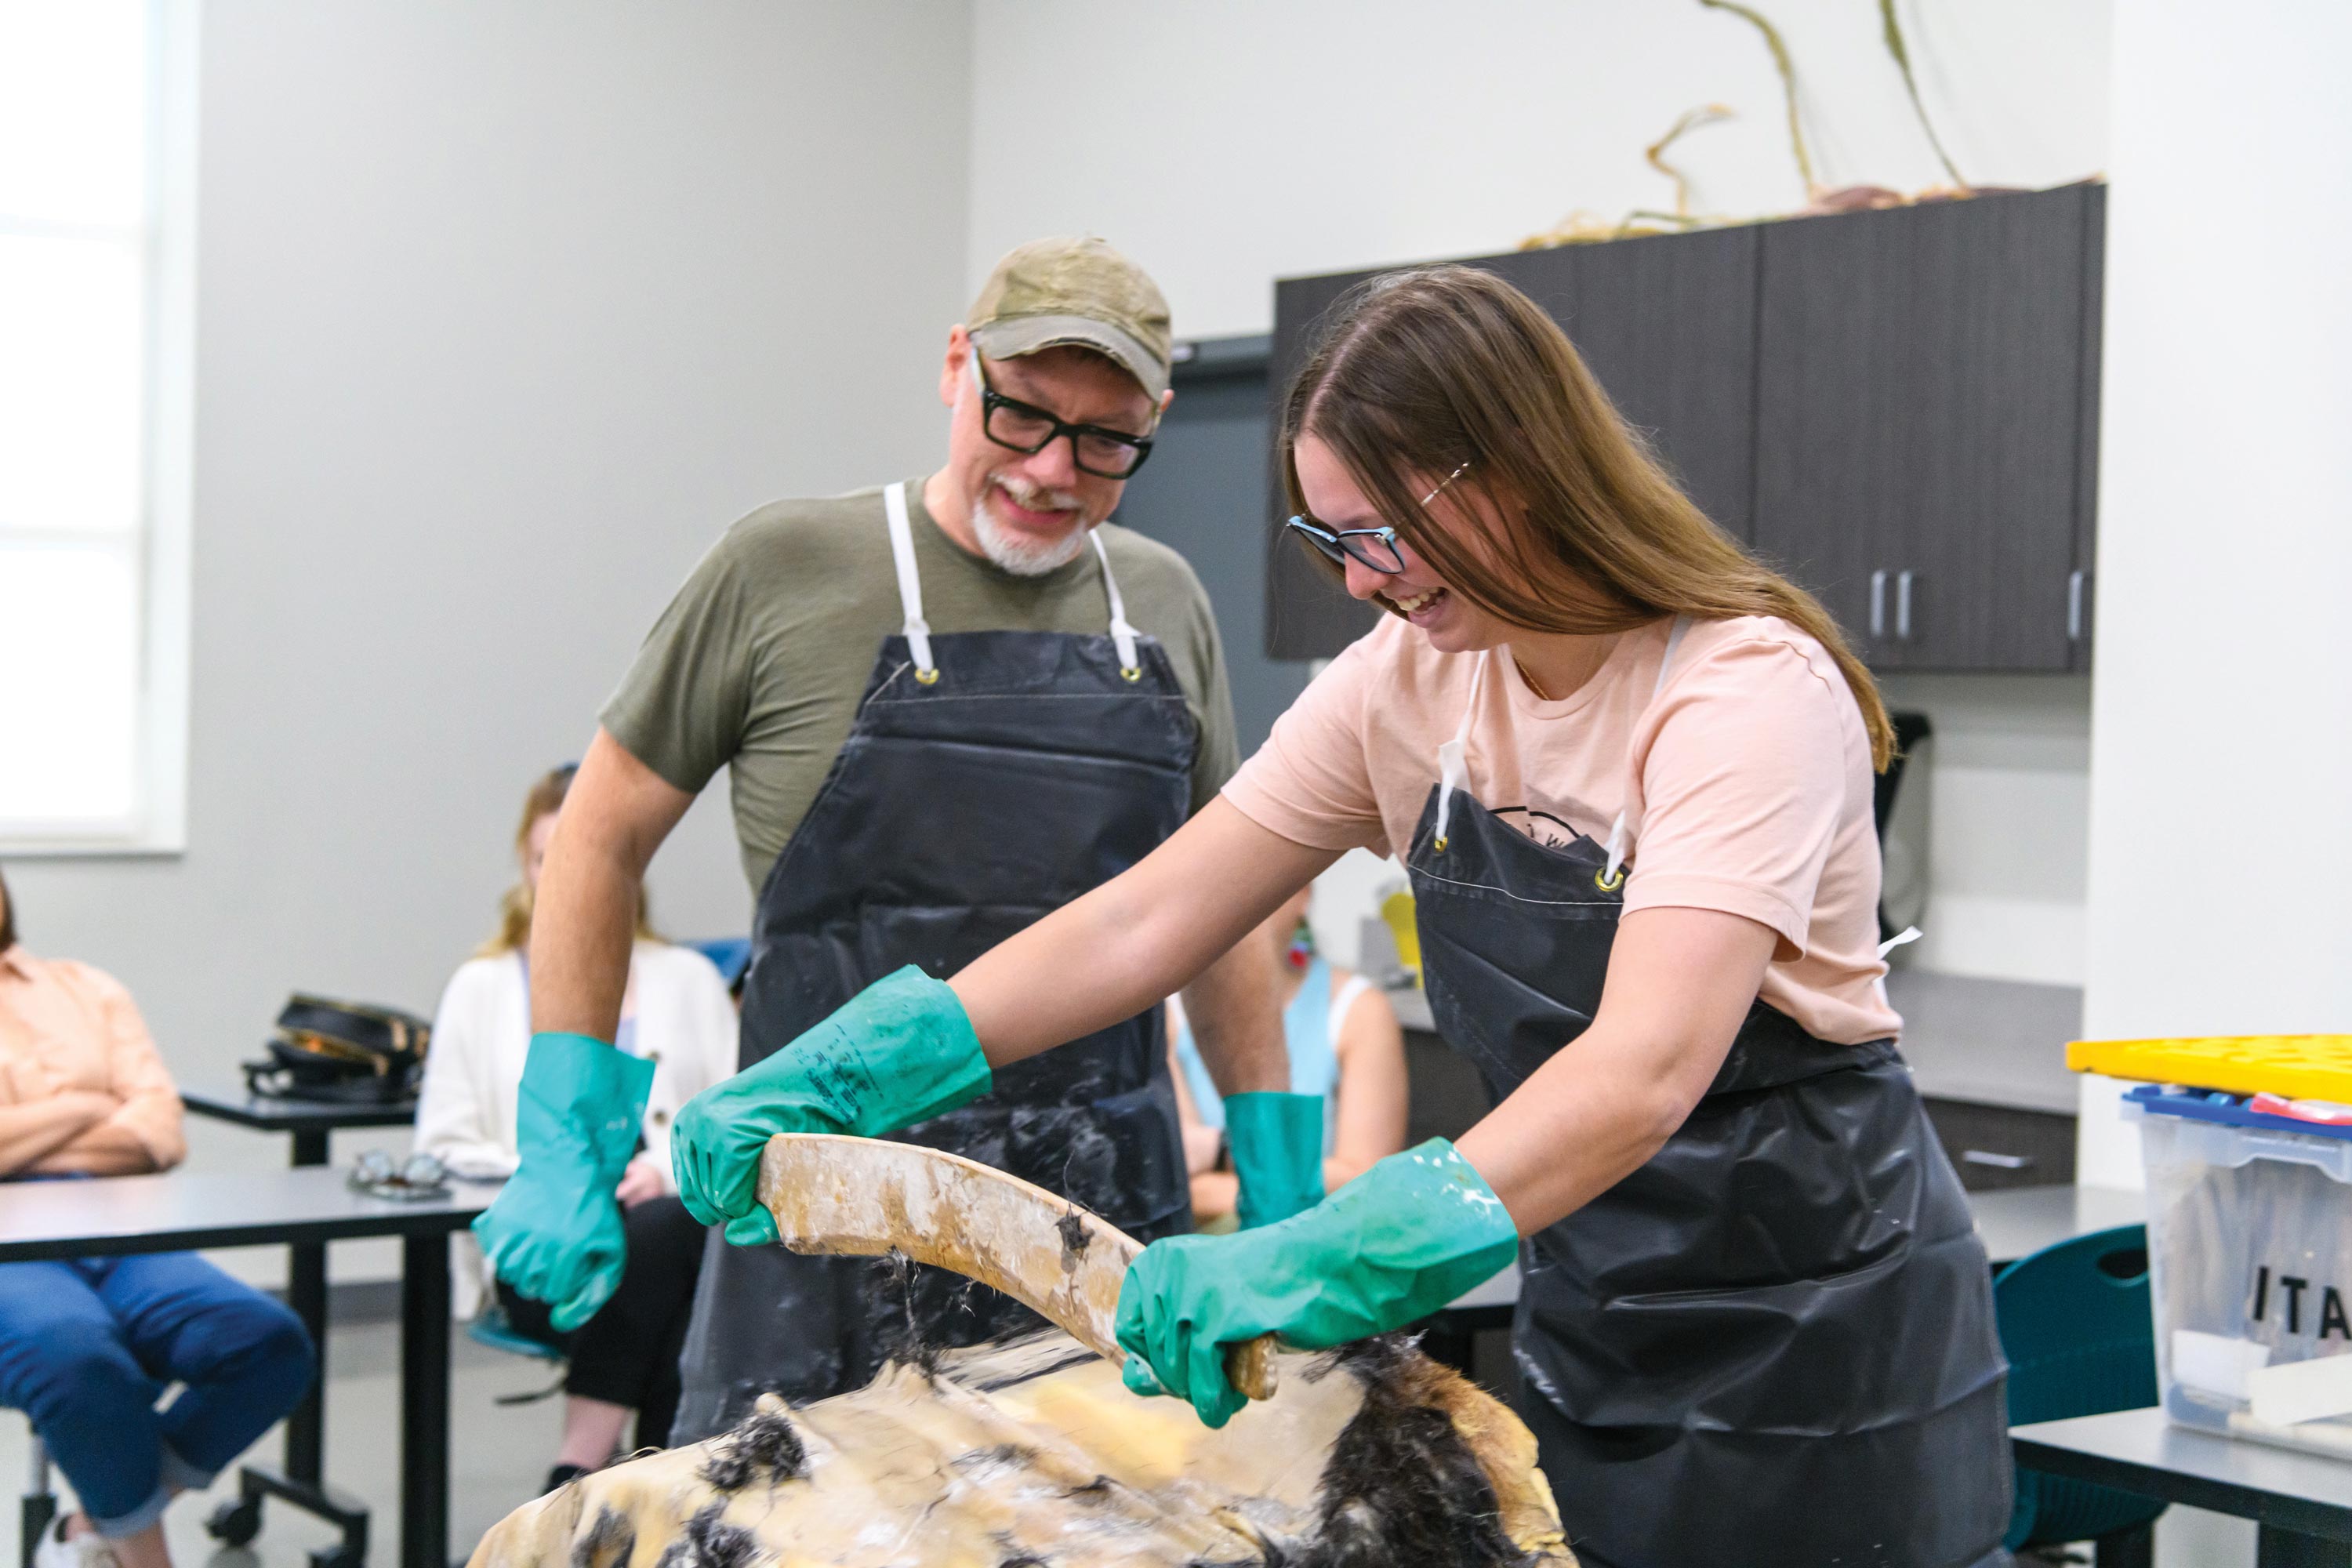 Most medieval manuscripts were made using parchment. OSU students learned about the parchment-making process from expert Jesse Meyer in a workshop this spring.